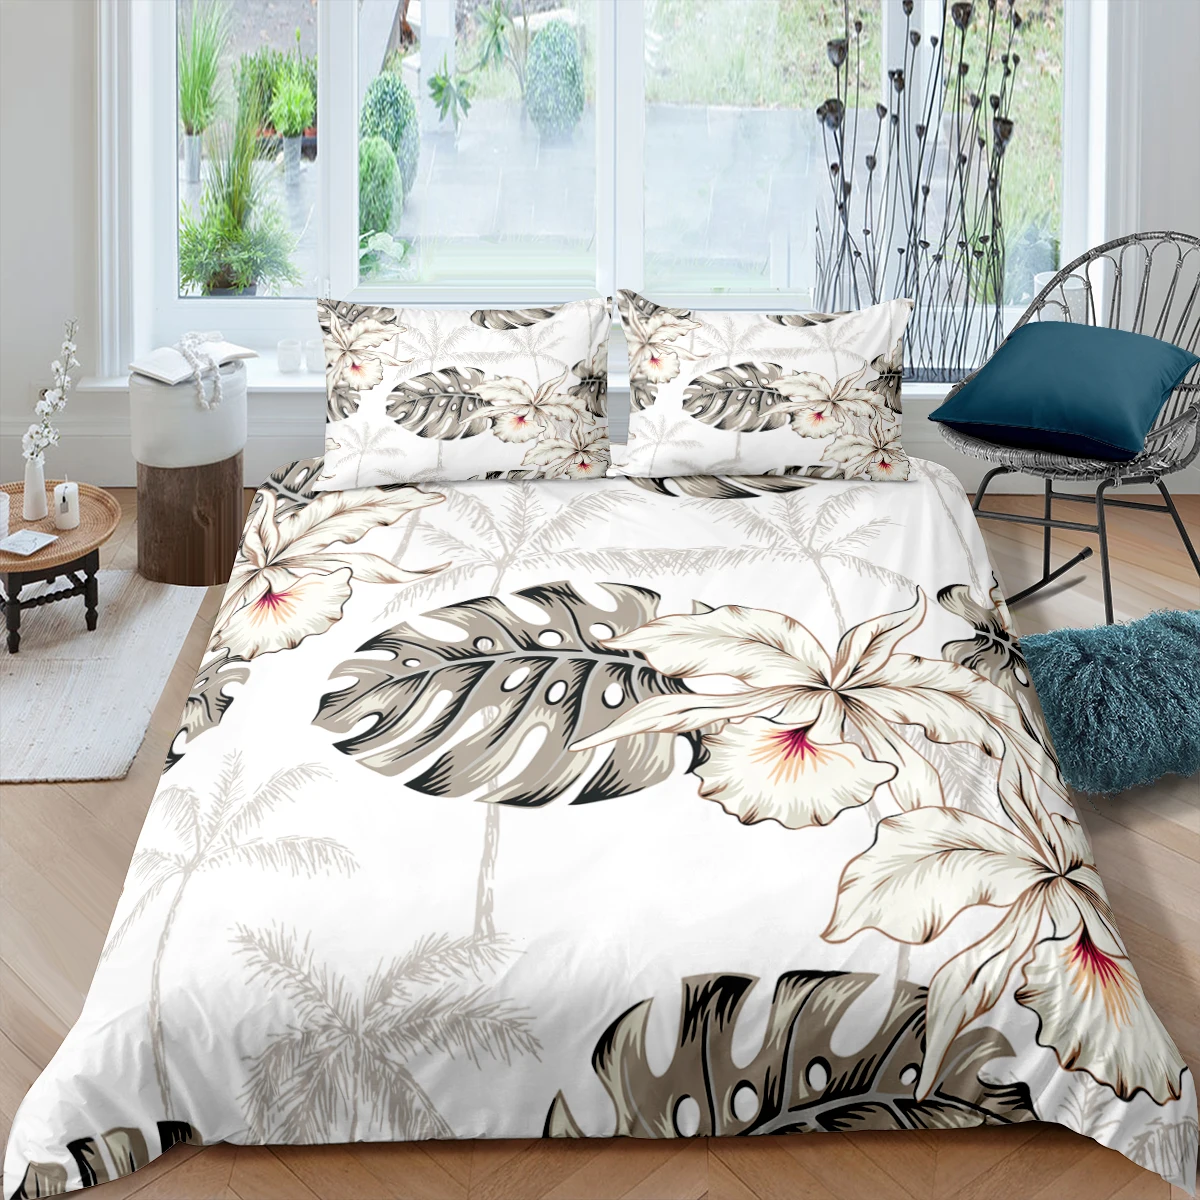 Home Textiles Luxury 3D Palm Leaves Duvet Cover Set Pillowcase Flower Bedding Set Queen and King Size Comforter Bedding Set 